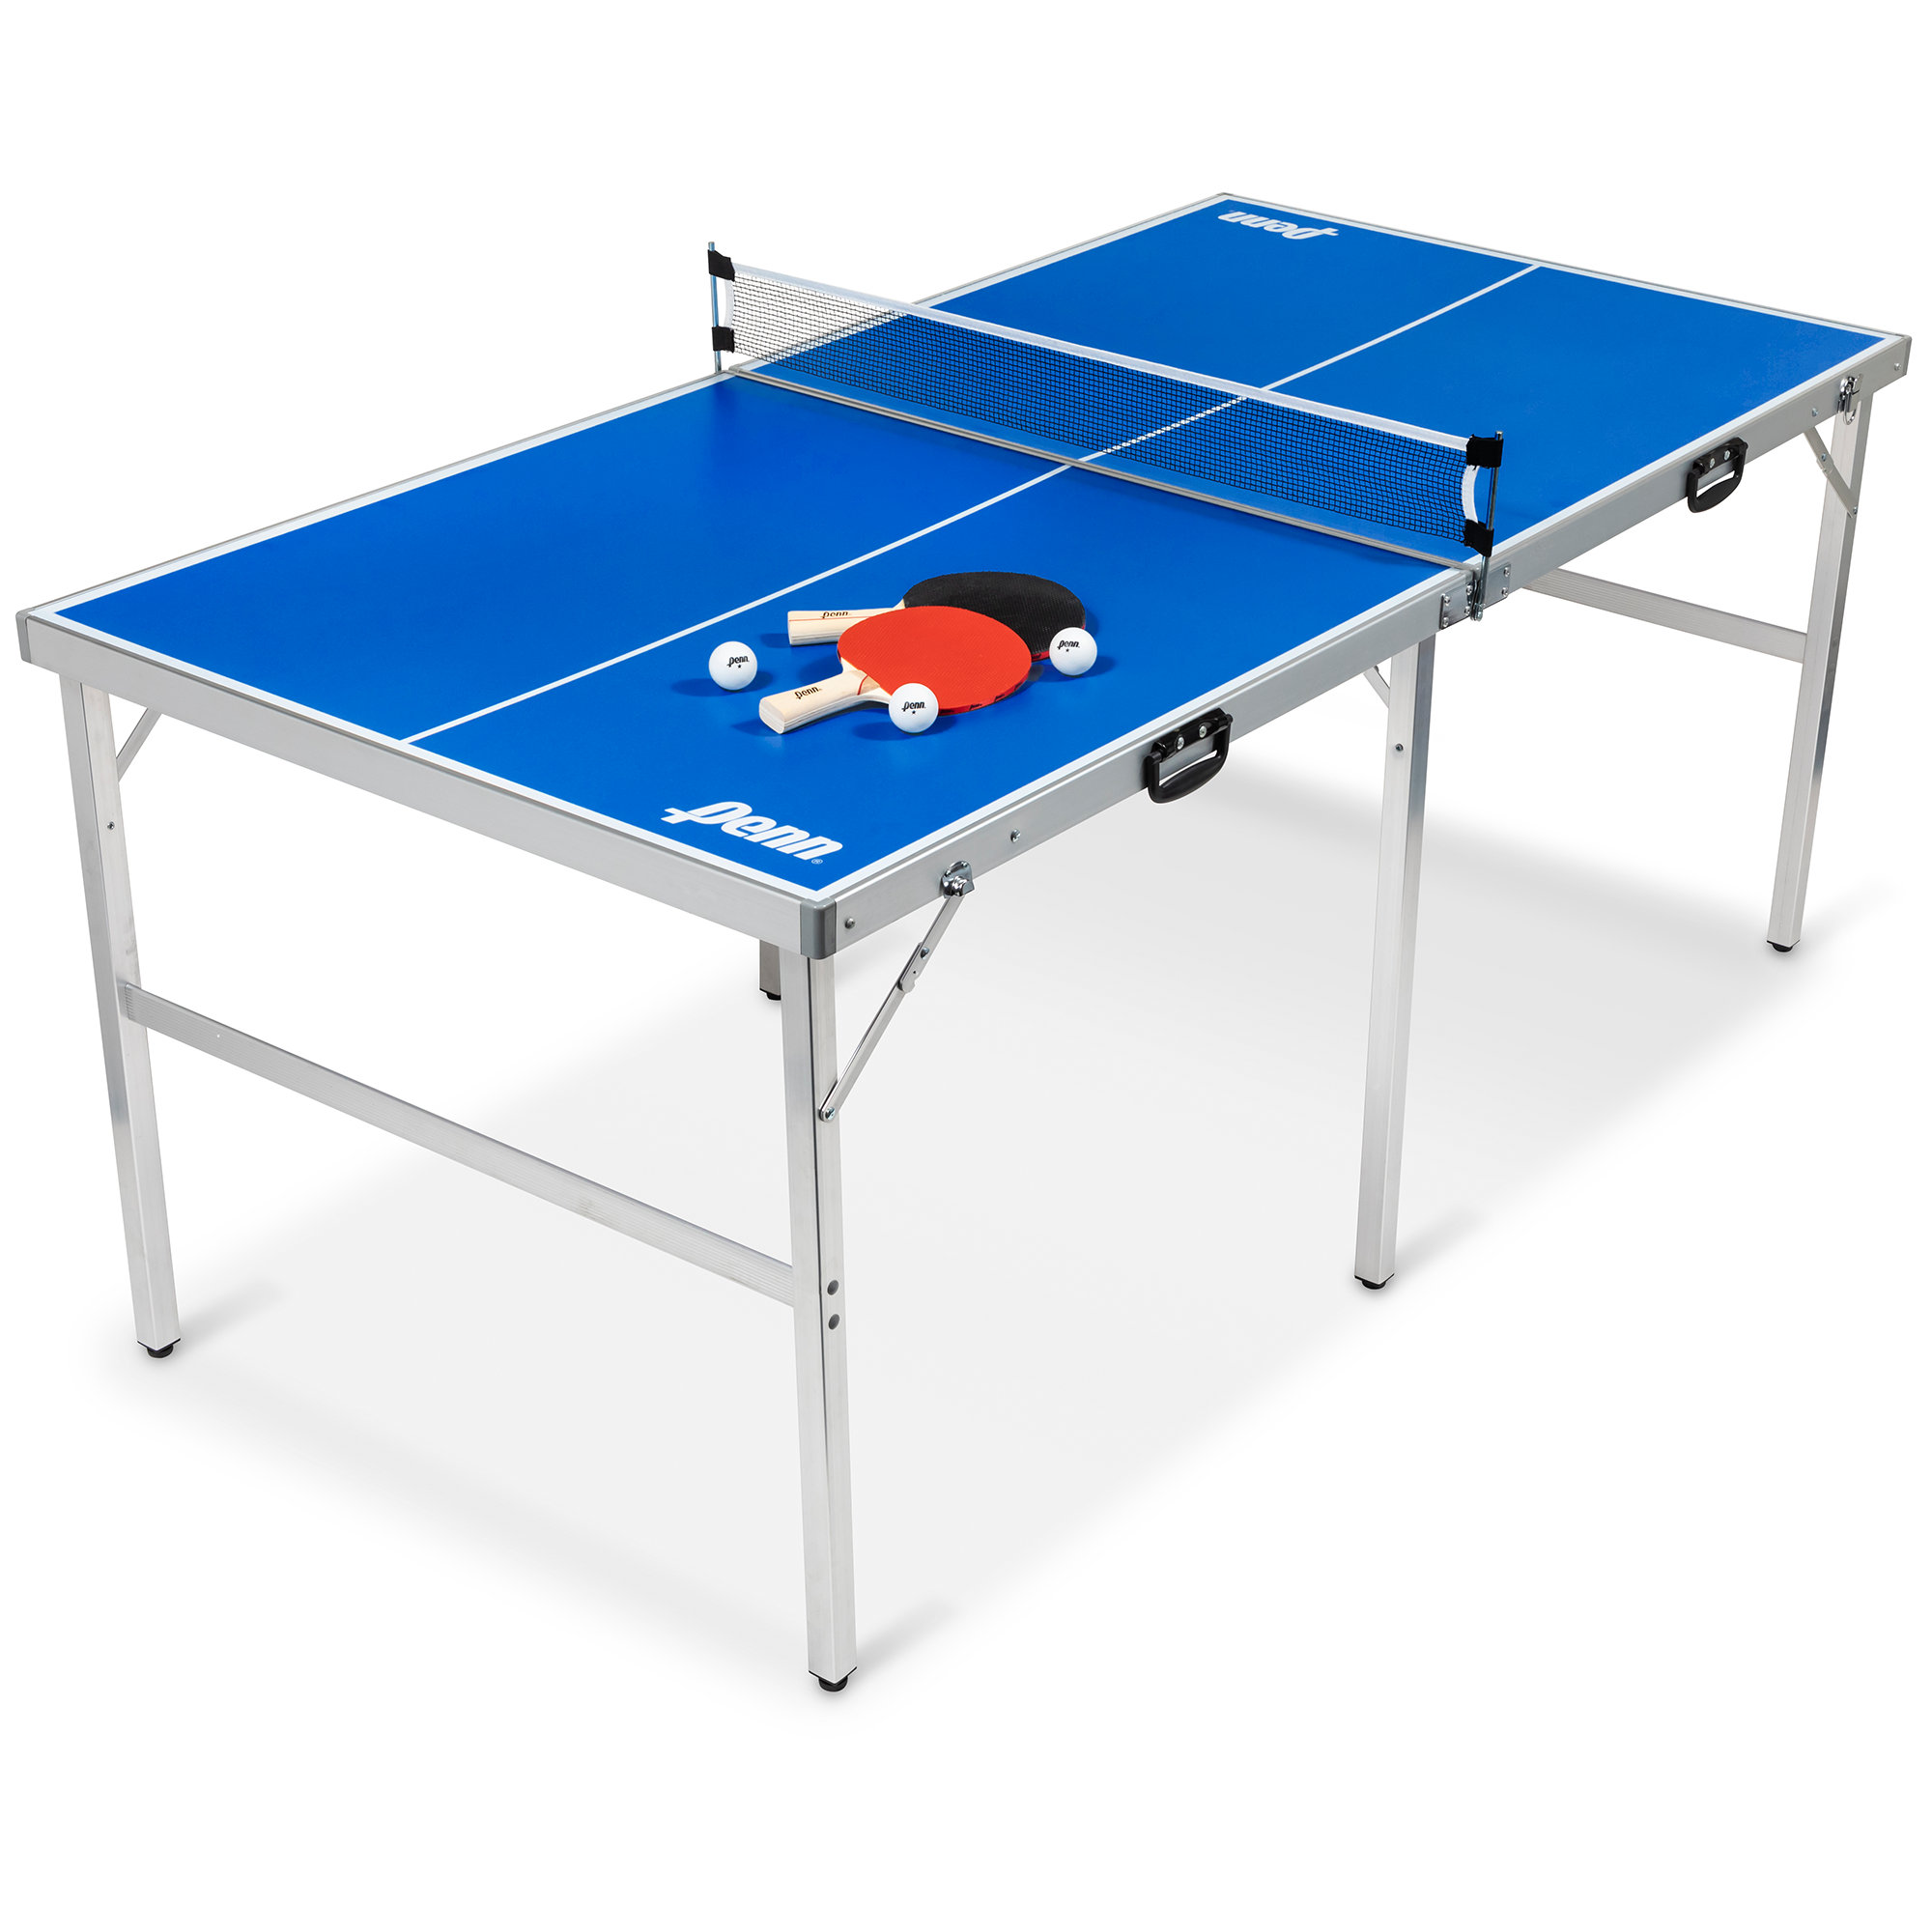 Single one line drawing table tennis racket and ball with